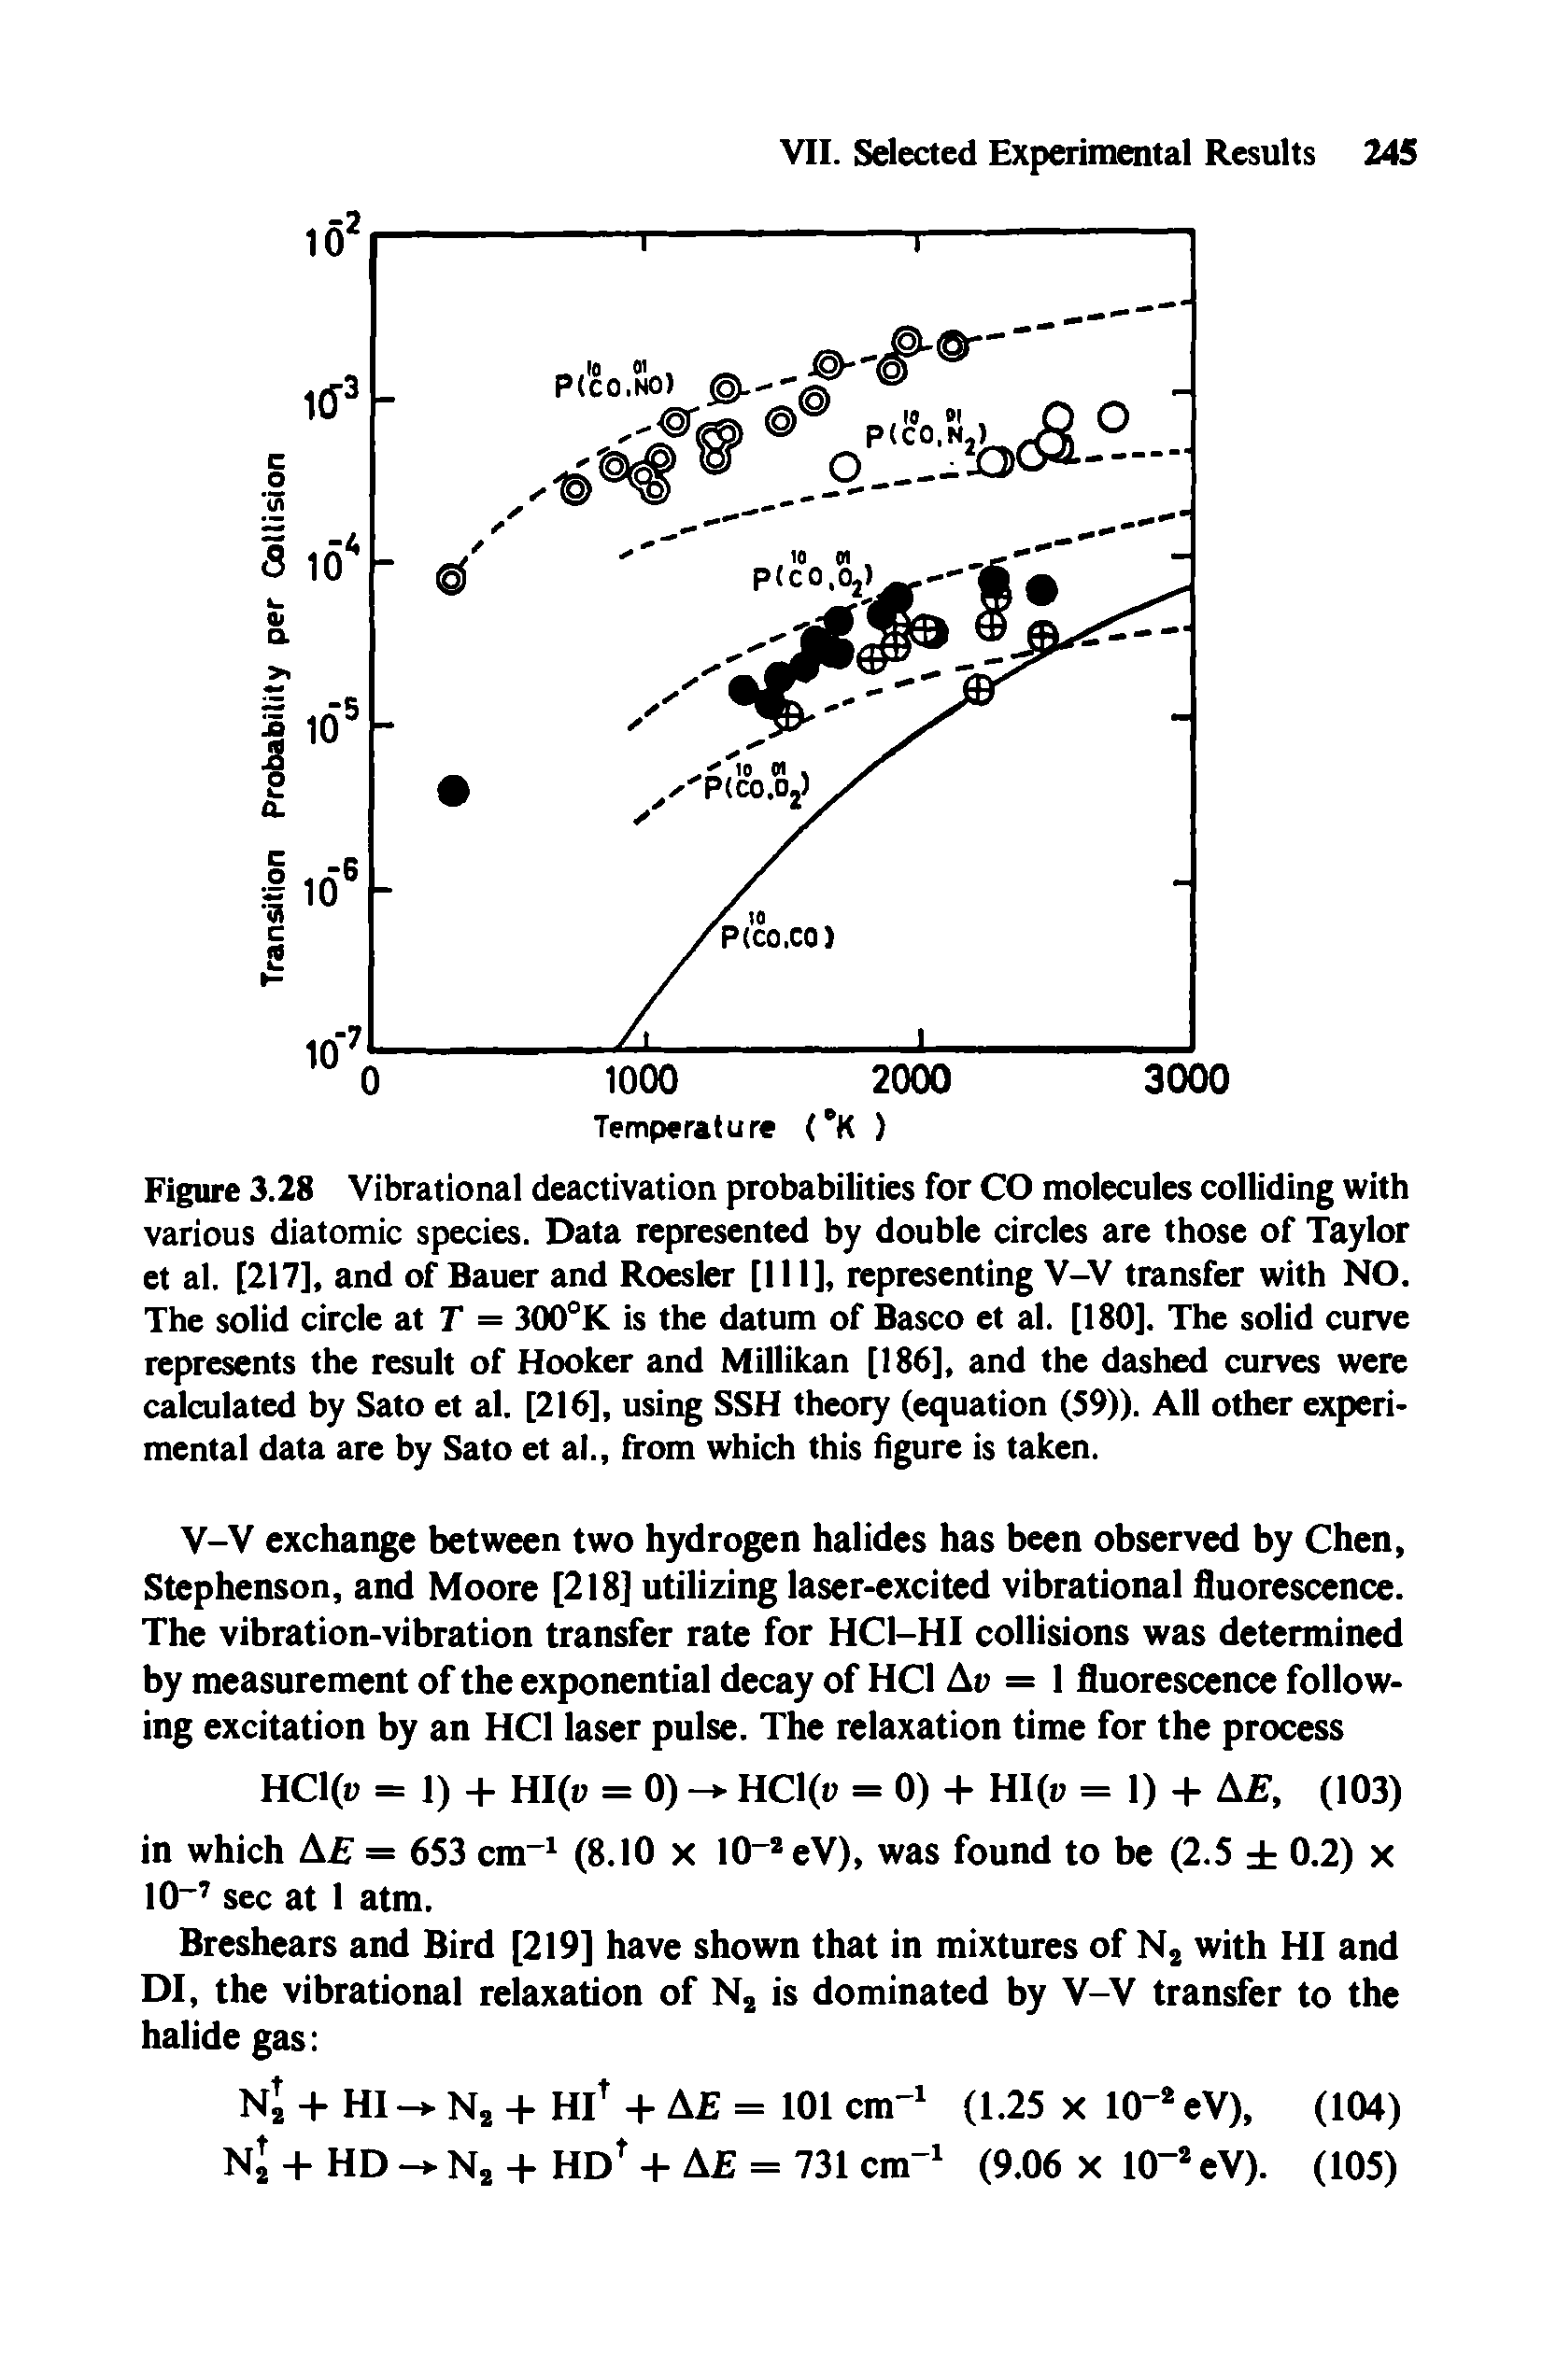 Figure 3.28 Vibrational deactivation probabilities for CO molecules colliding with various diatomic species. Data represented by double circles are those of Taylor et al. [217], and of Bauer and Roesler [111], representing V-V transfer with NO. The solid circle at T = 300°K is the datum of Basco et al. [180]. The solid curve represents the result of Hooker and Millikan [186], and the dashed curves were calculated by Sato et al. [216], using SSH theory (equation (59)). All other experimental data are by Sato et al., from which this figure is taken.